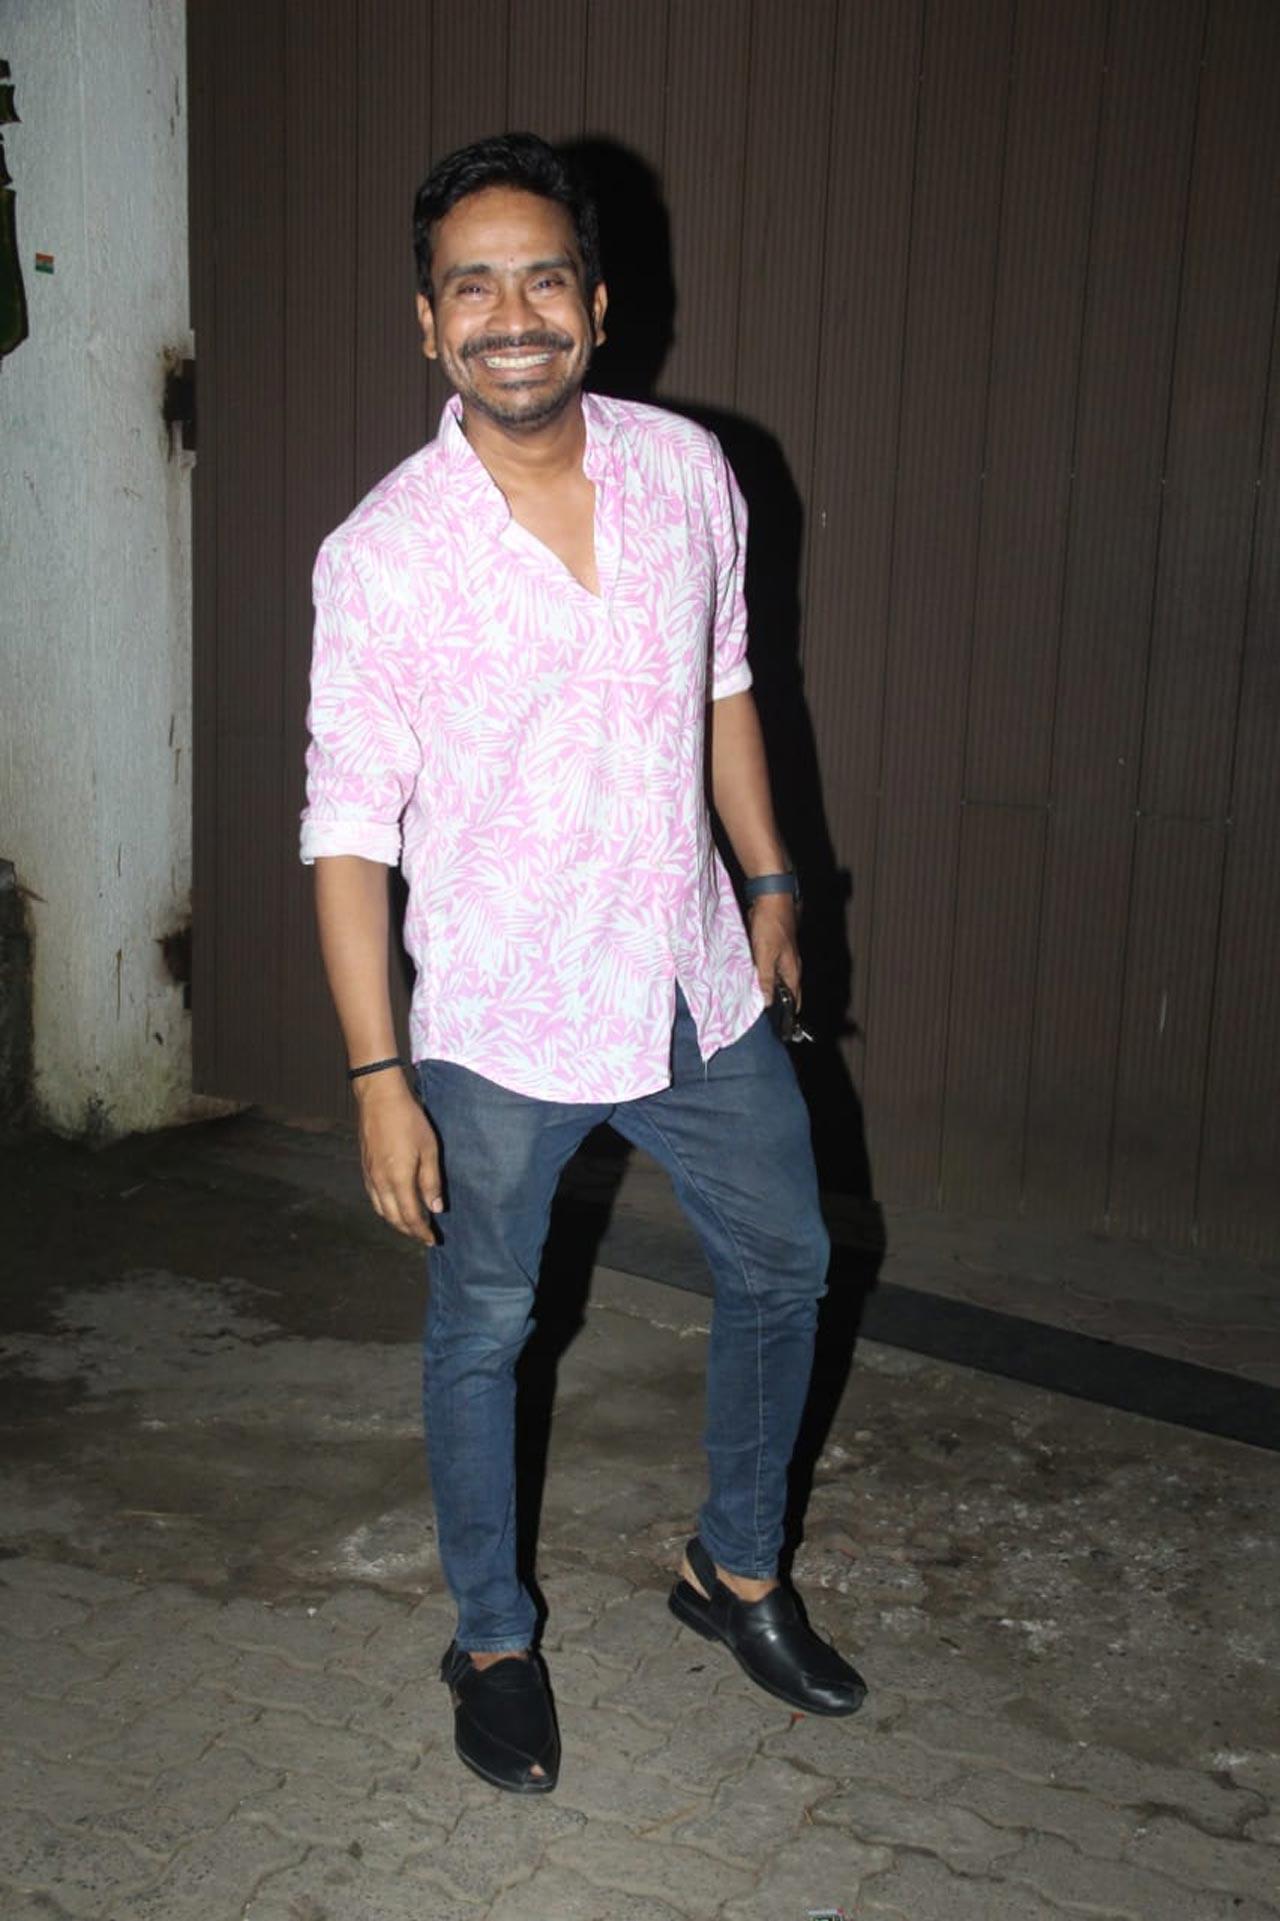 Mushtaq Shiekh was all smiles when papped at Shilpa Shetty's residence